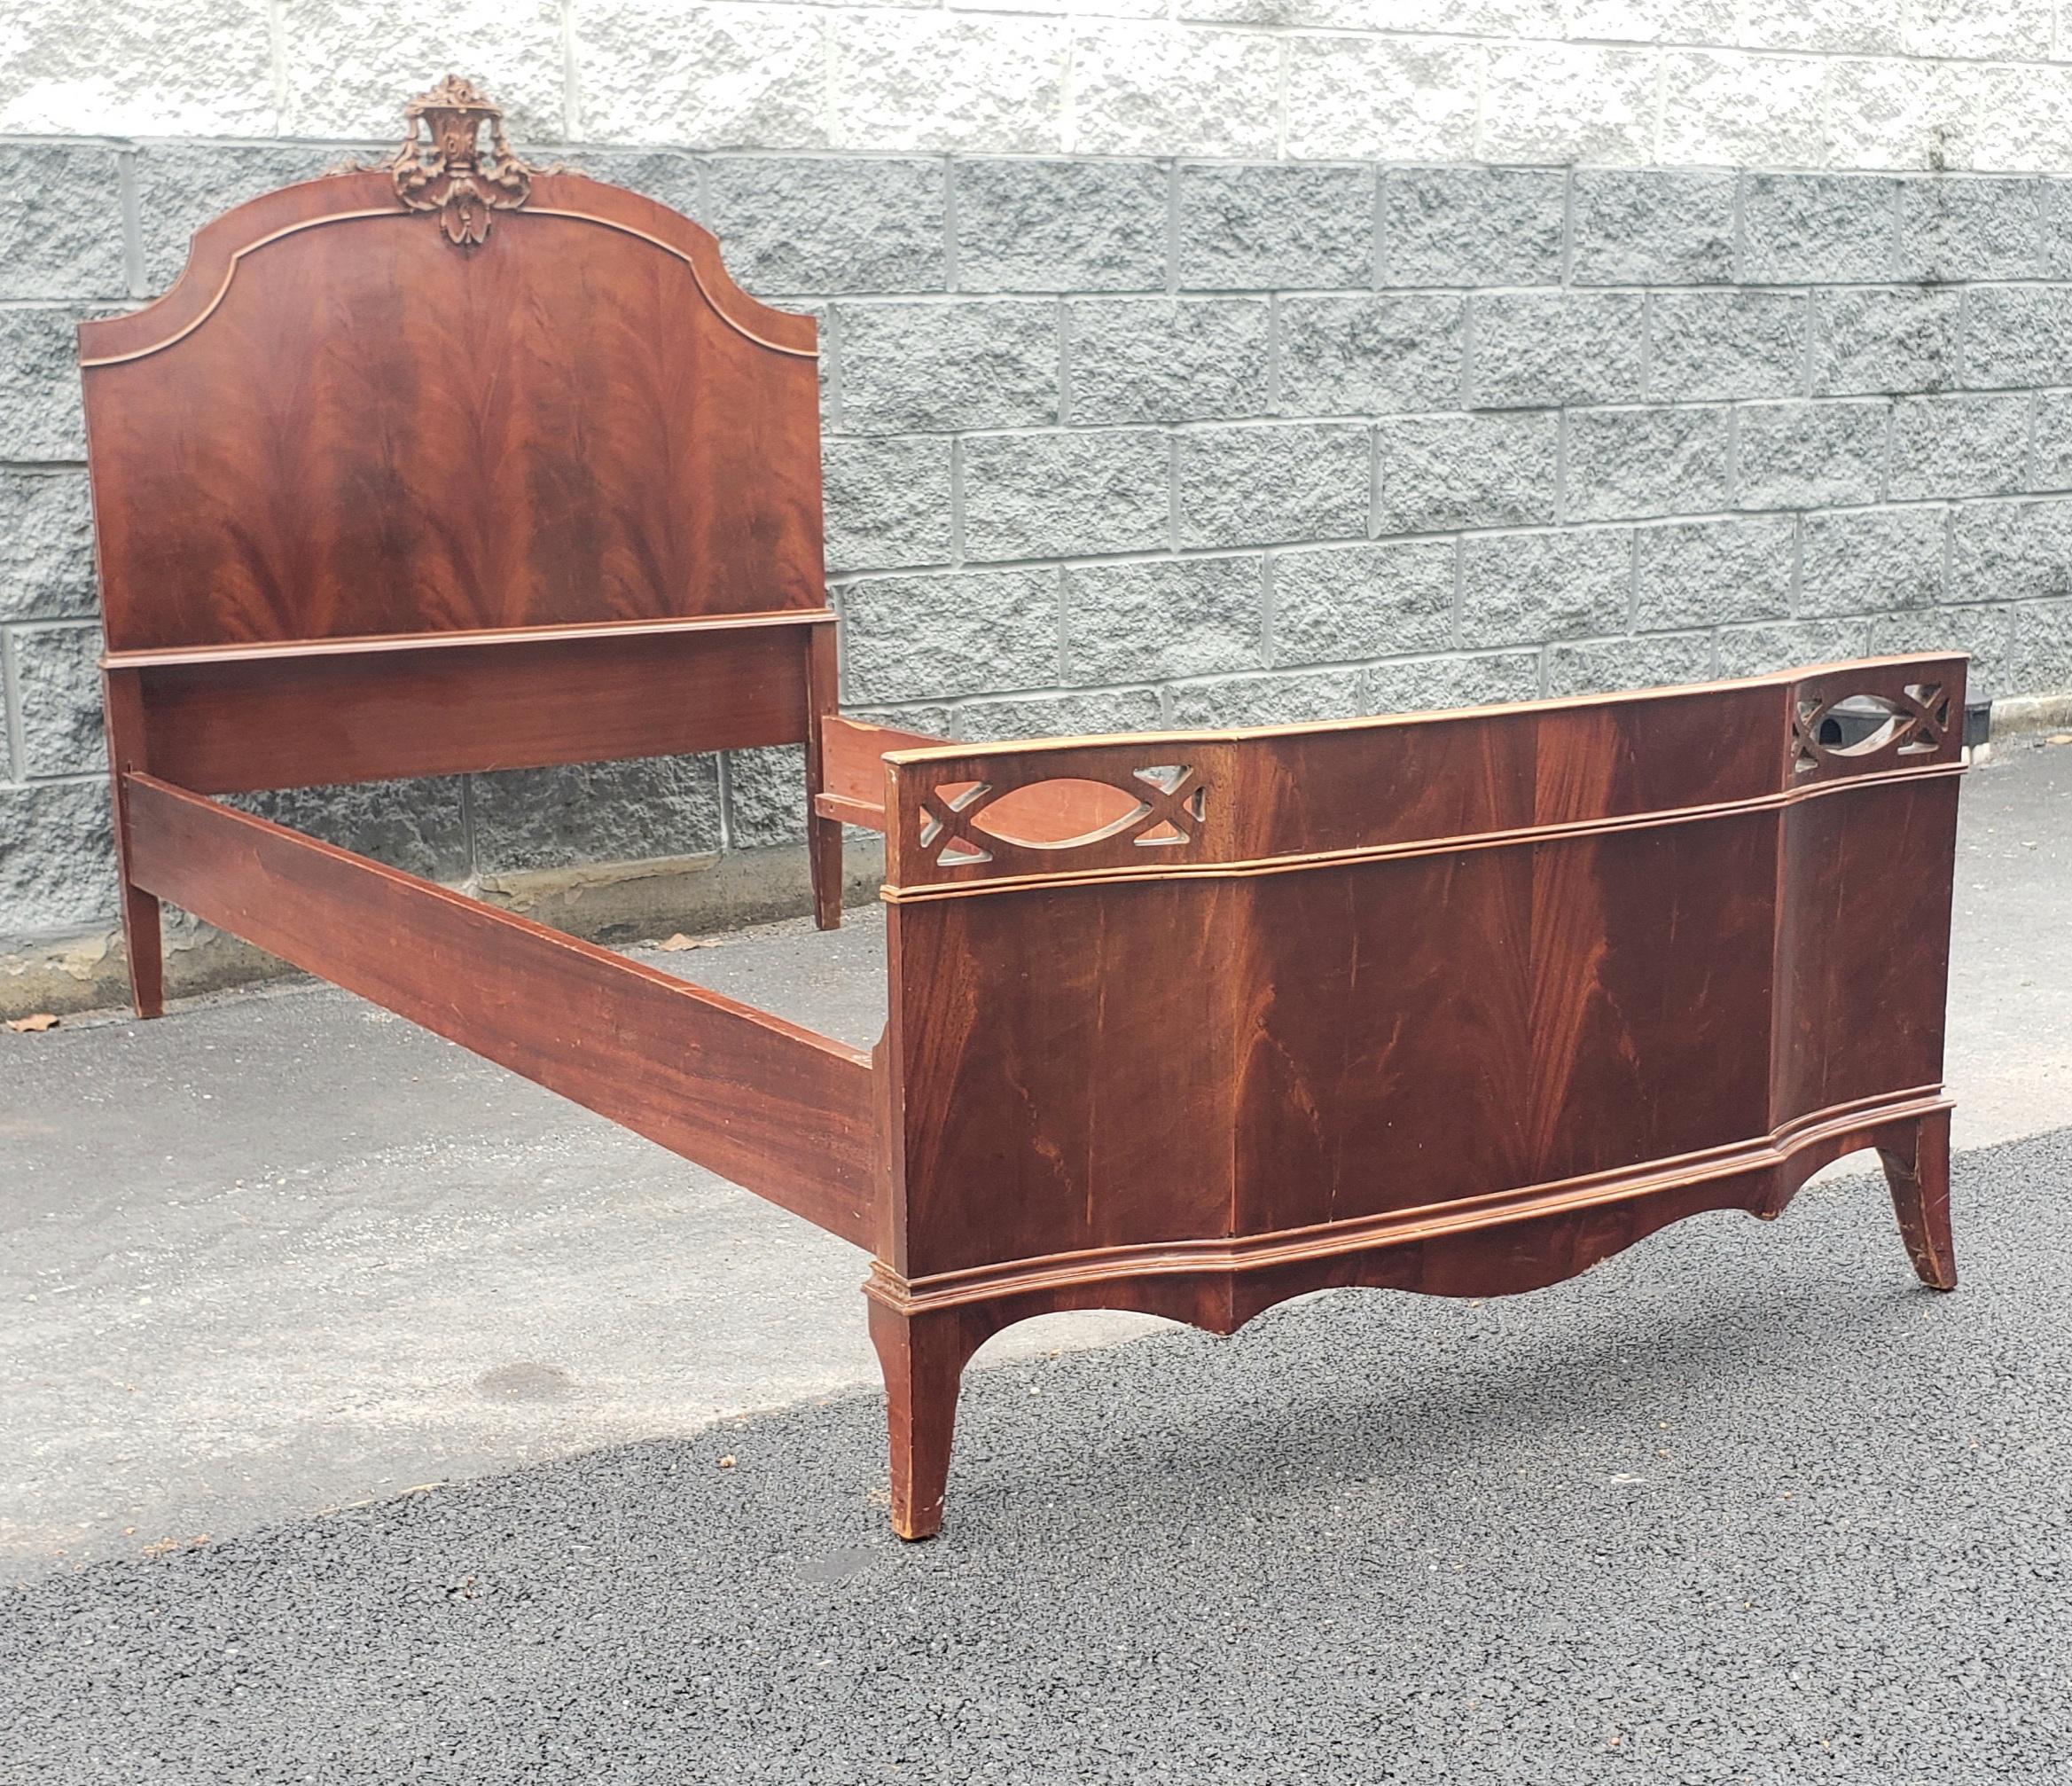 A early 20th century George III Style Carved Crest and Flame Mahogany Twin Bed in good and sturdy antique condition.